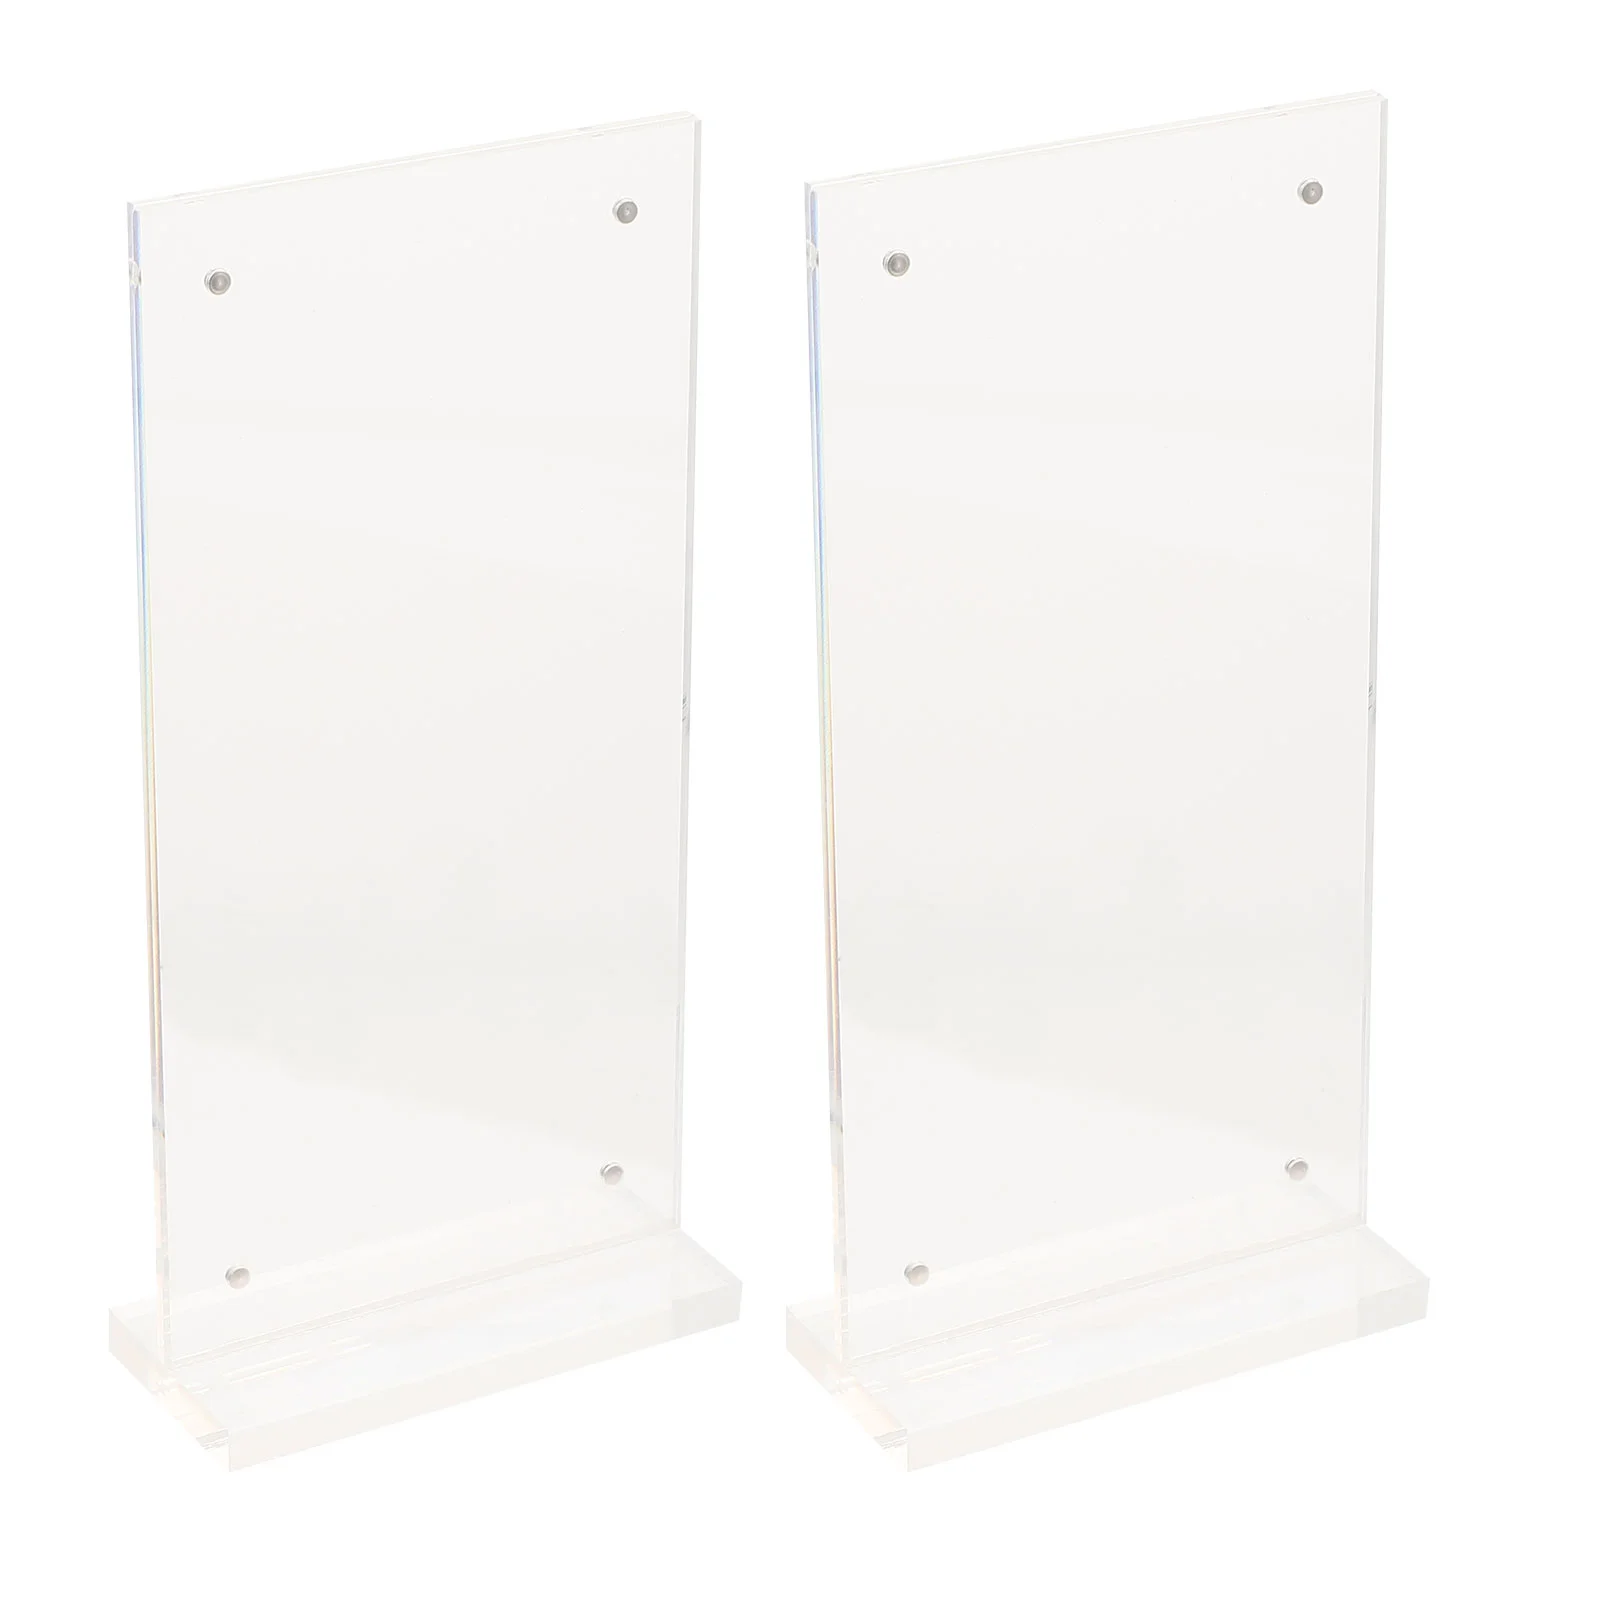 2Pcs Magnetic Acrylic Display Stand Table Menu Holder Clear Signs Centerpiece Decoration 3 inch acrylic clear photo display stand korean ins kpop idol photo card photo frame polaroid photo stand decoration